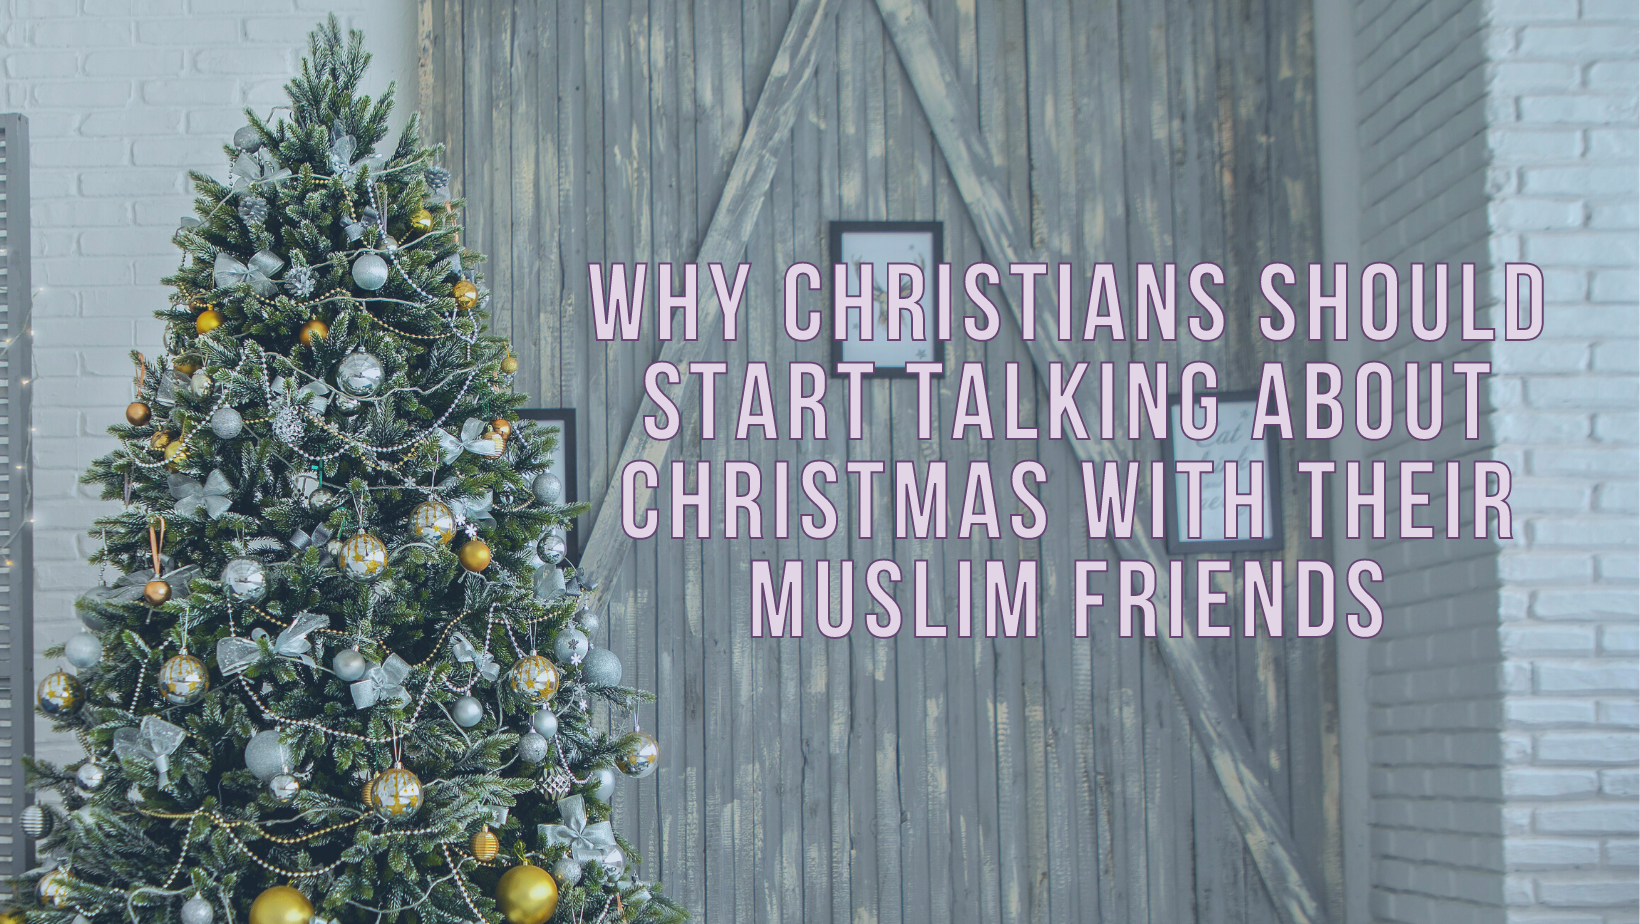 Why Christians should start talking about Christmas with their Muslim friends